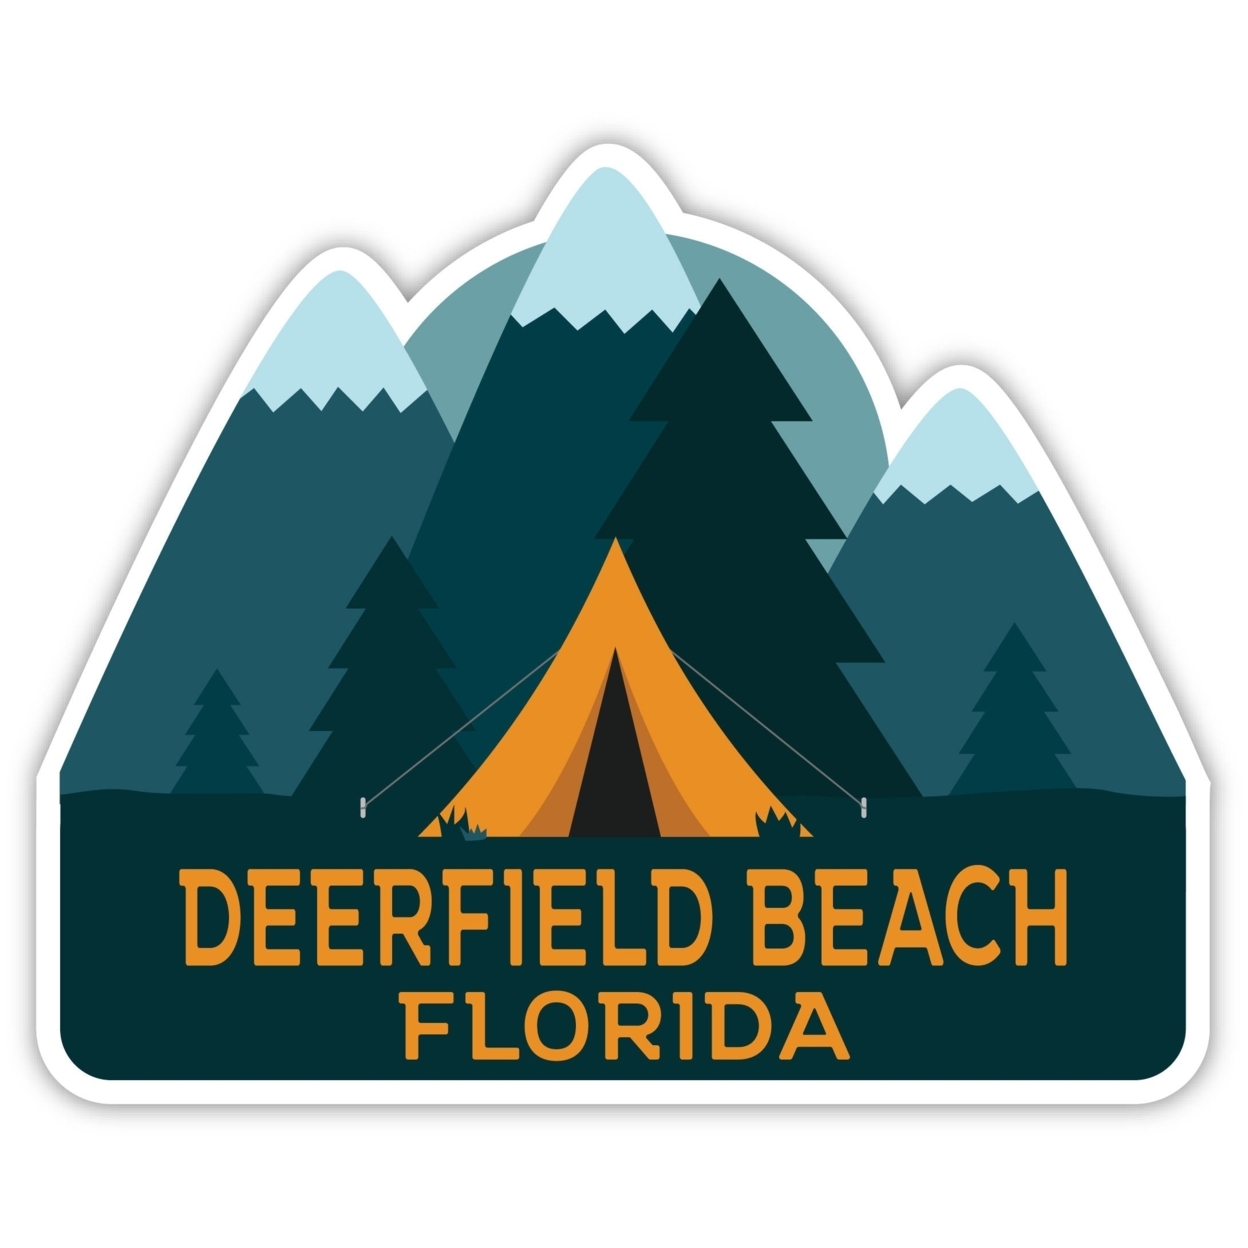 Deerfield Beach Florida Souvenir Decorative Stickers (Choose Theme And Size) - 4-Pack, 2-Inch, Tent